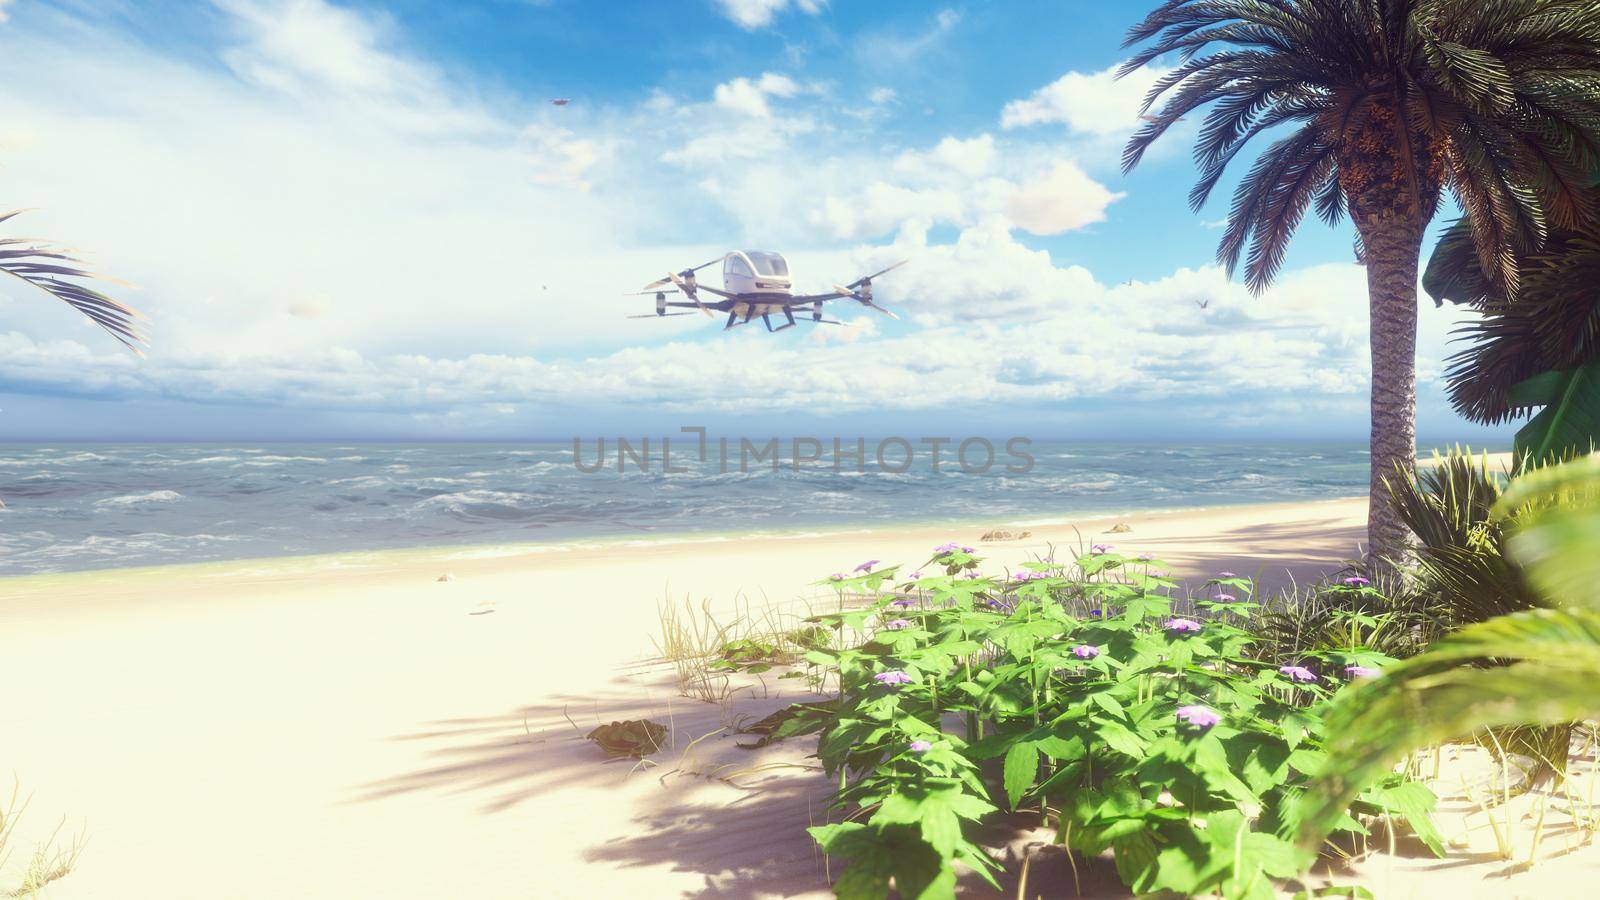 An unmanned passenger air taxi lands on a tropical beach. The concept of the future driverless taxi.